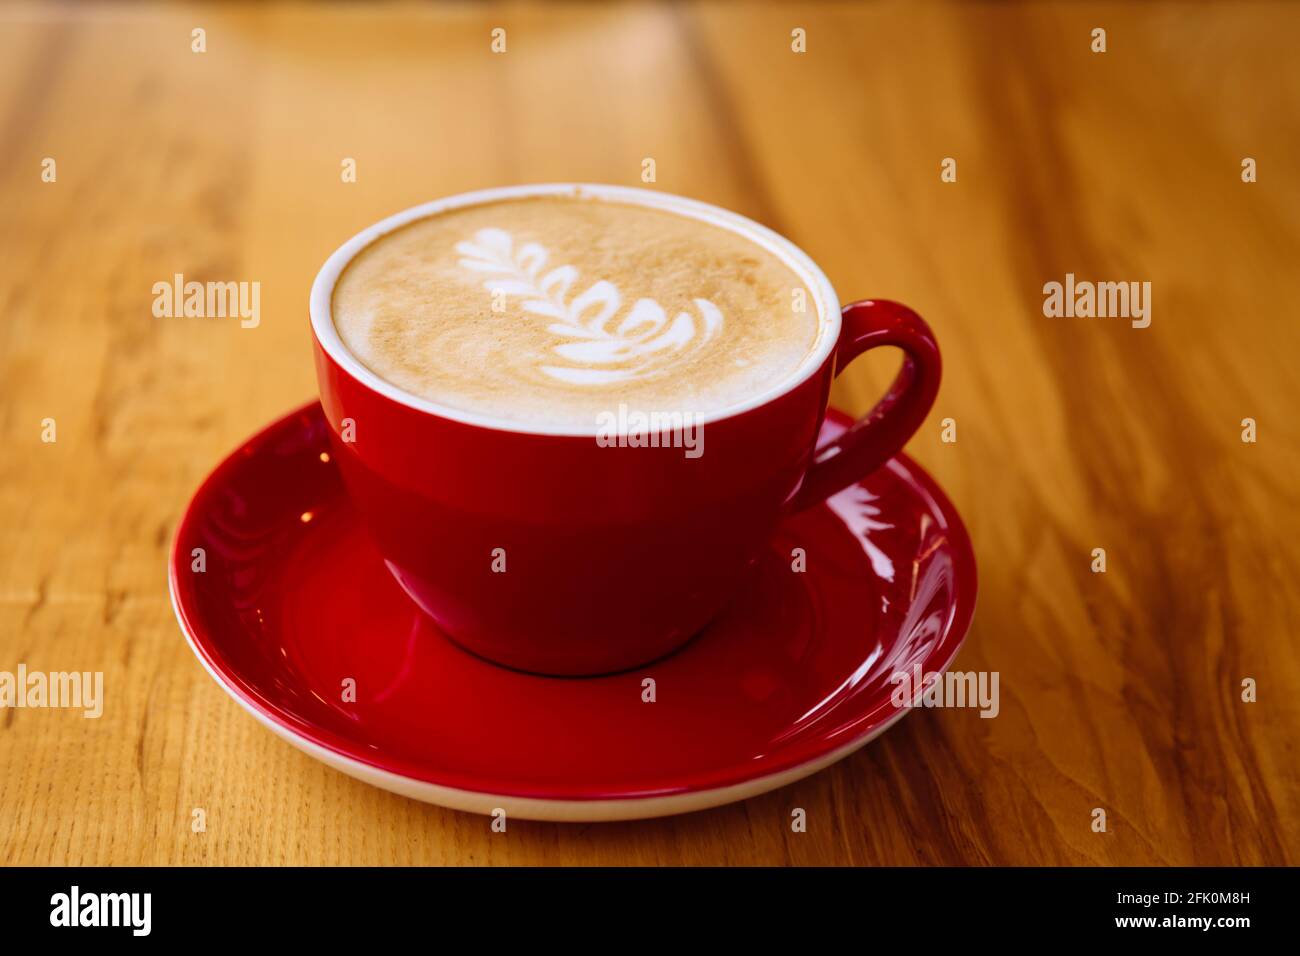 Aromatic coffee in a red cup with milk foam and latte art on a light wooden table. Stock Photo